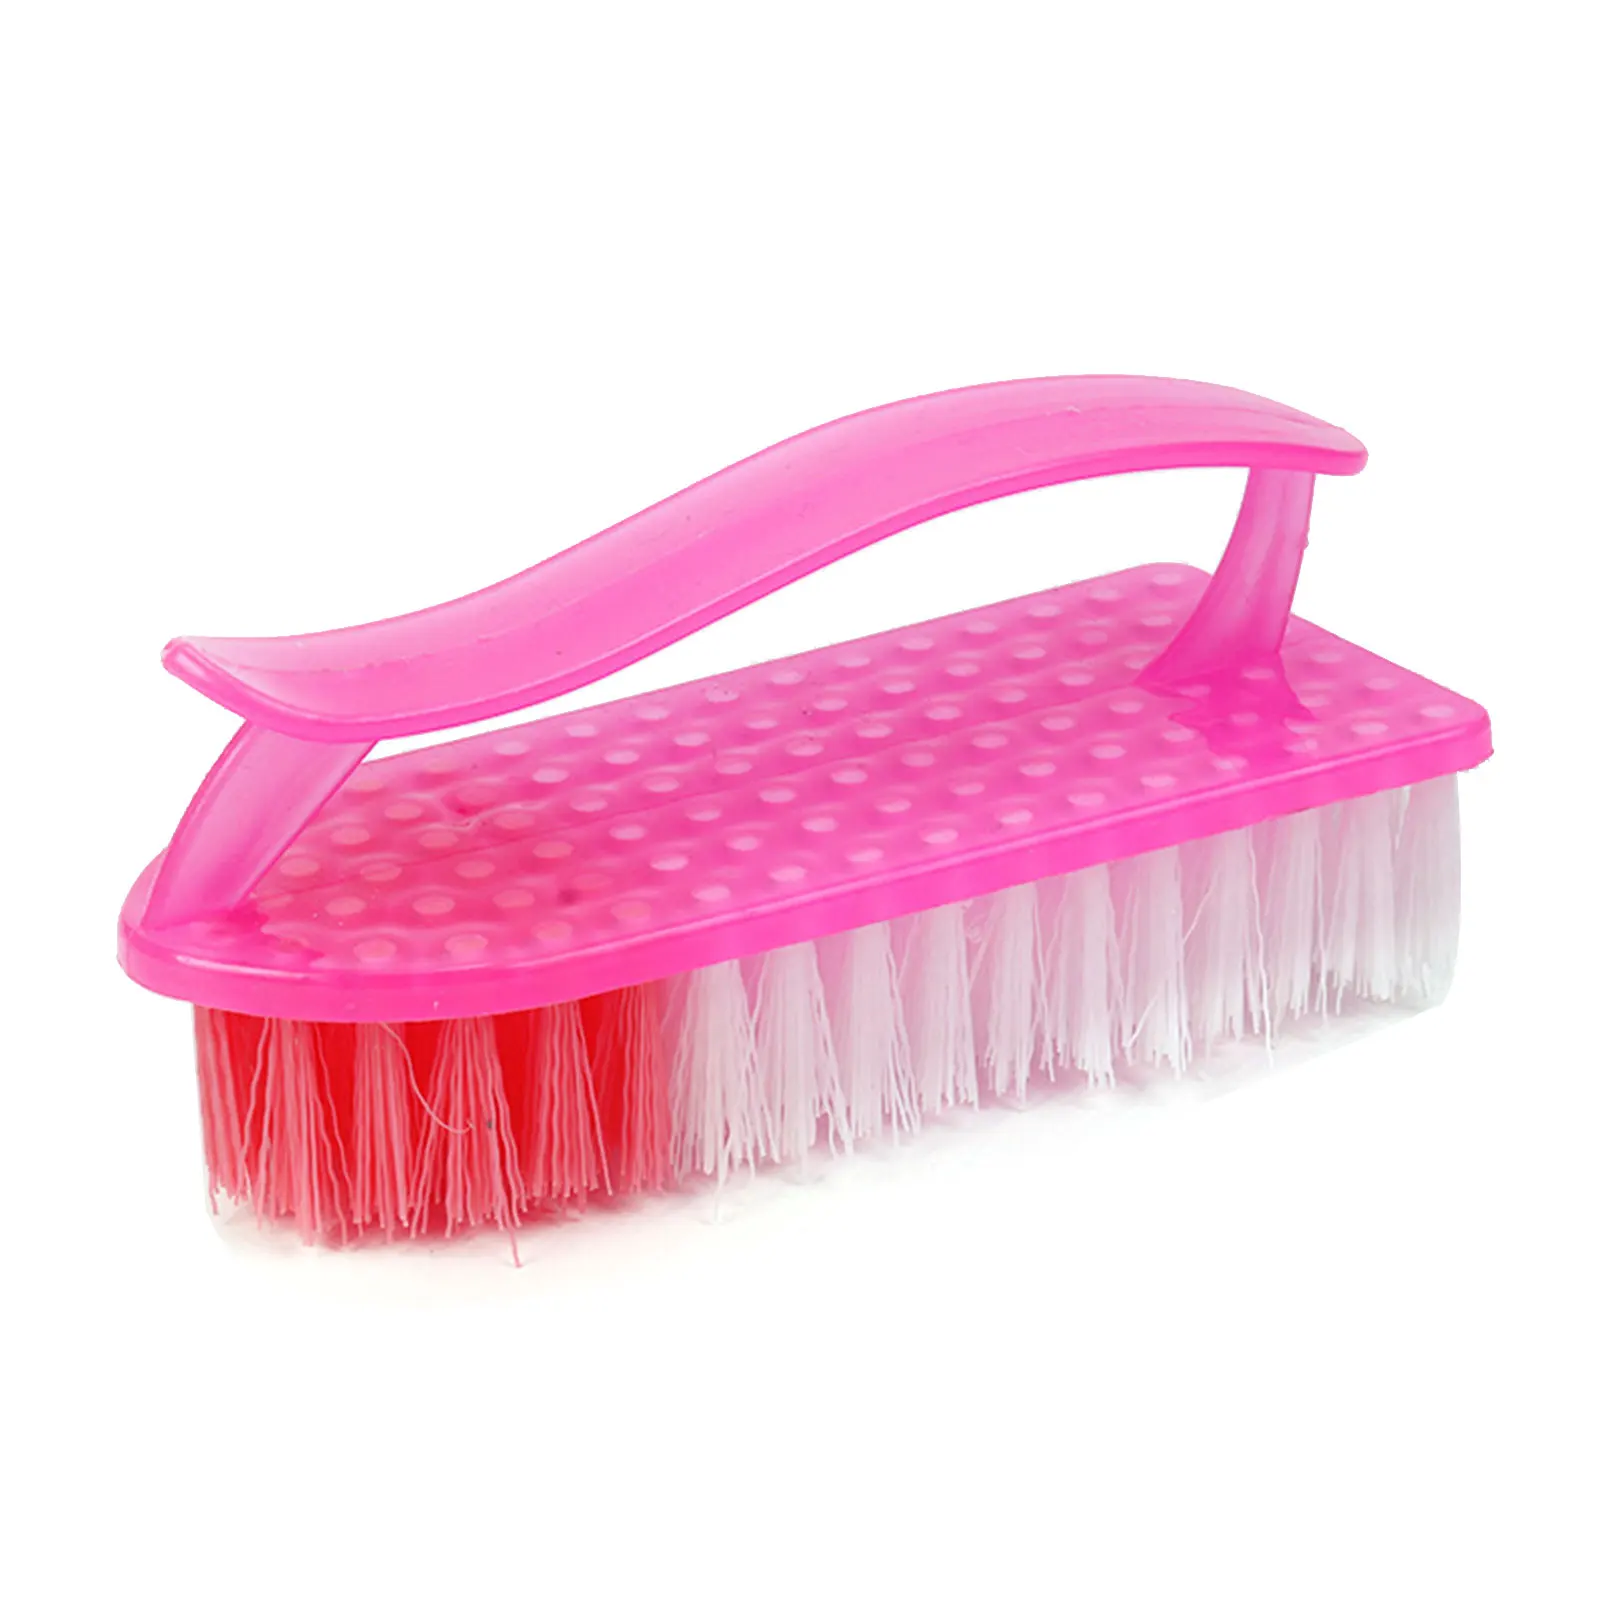 https://ae01.alicdn.com/kf/S54d53bcb1ed1468c85a2f997f731c83dn/Floor-Durable-Shoe-Clothes-Laundry-Scrub-Brush-Easy-Grip-Ergonomic-Carpet-Home-Wall-Kitchen-Cleaning-Tool.jpg